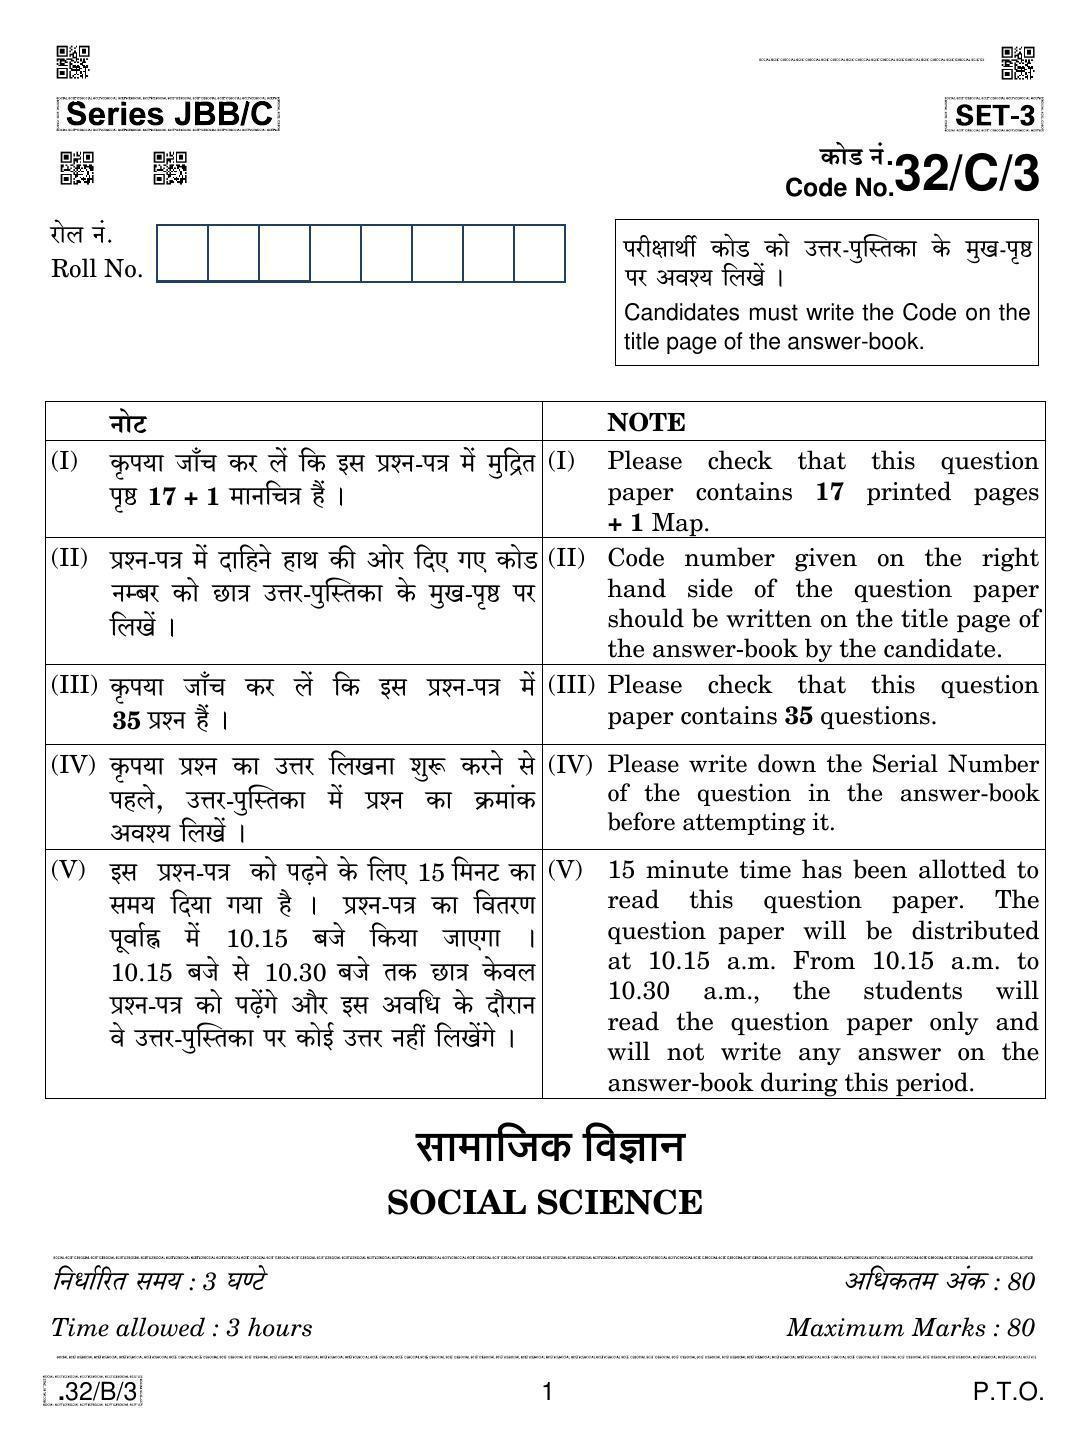 CBSE Class 10 32-C-3 Social Science 2020 Compartment Question Paper - Page 1